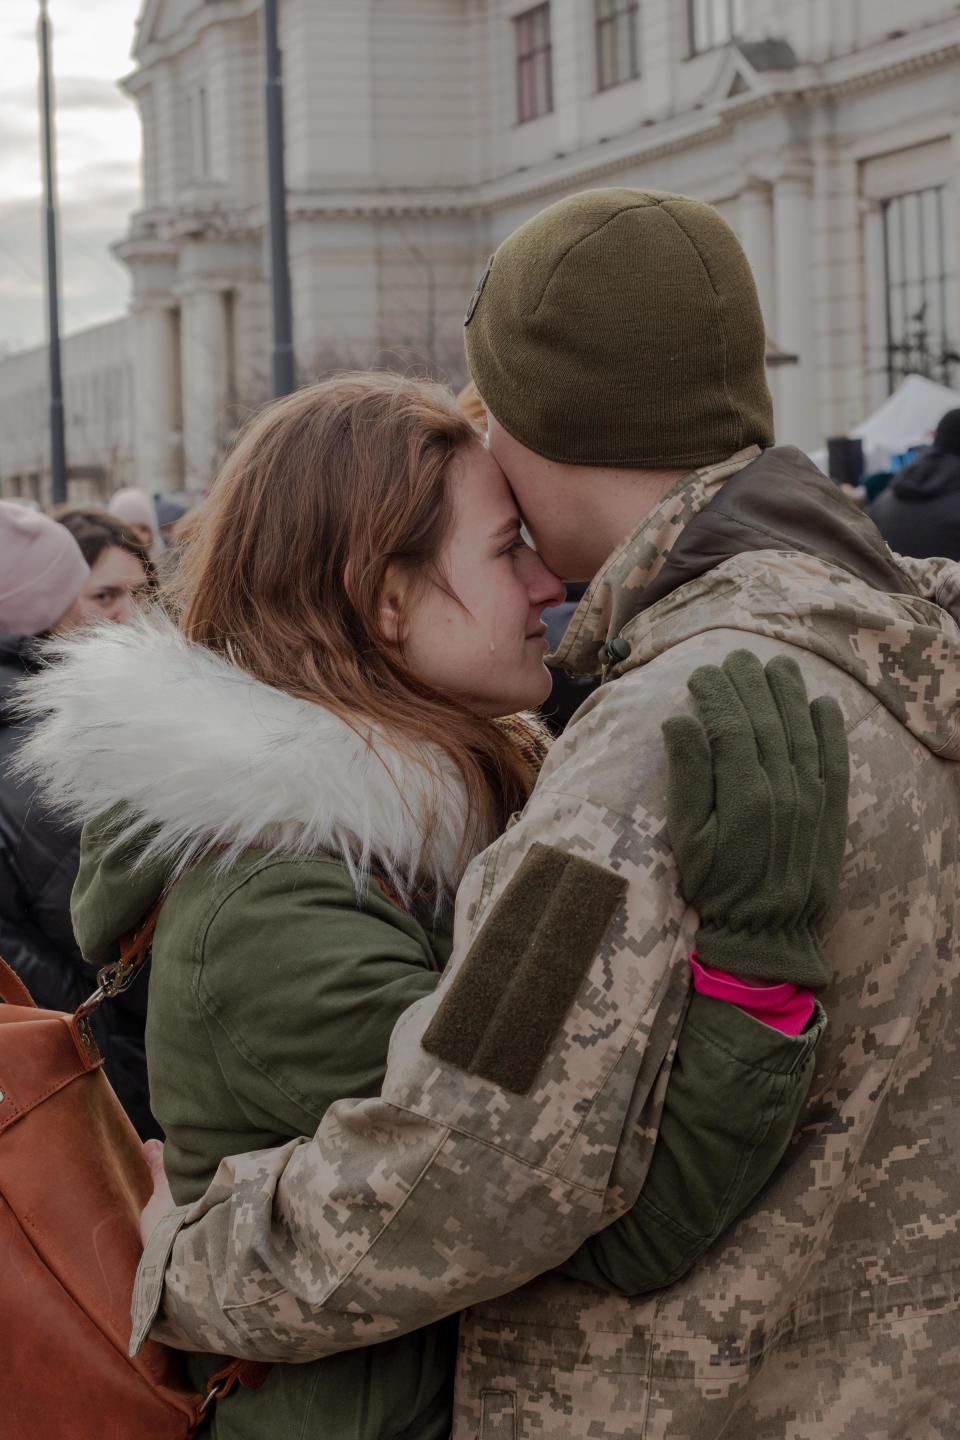 Soldiers say emotional goodbyes to their partners at the Lviv train station before heading to the front lines on March 8.<span class="copyright">Natalie Keyssar for TIME</span>